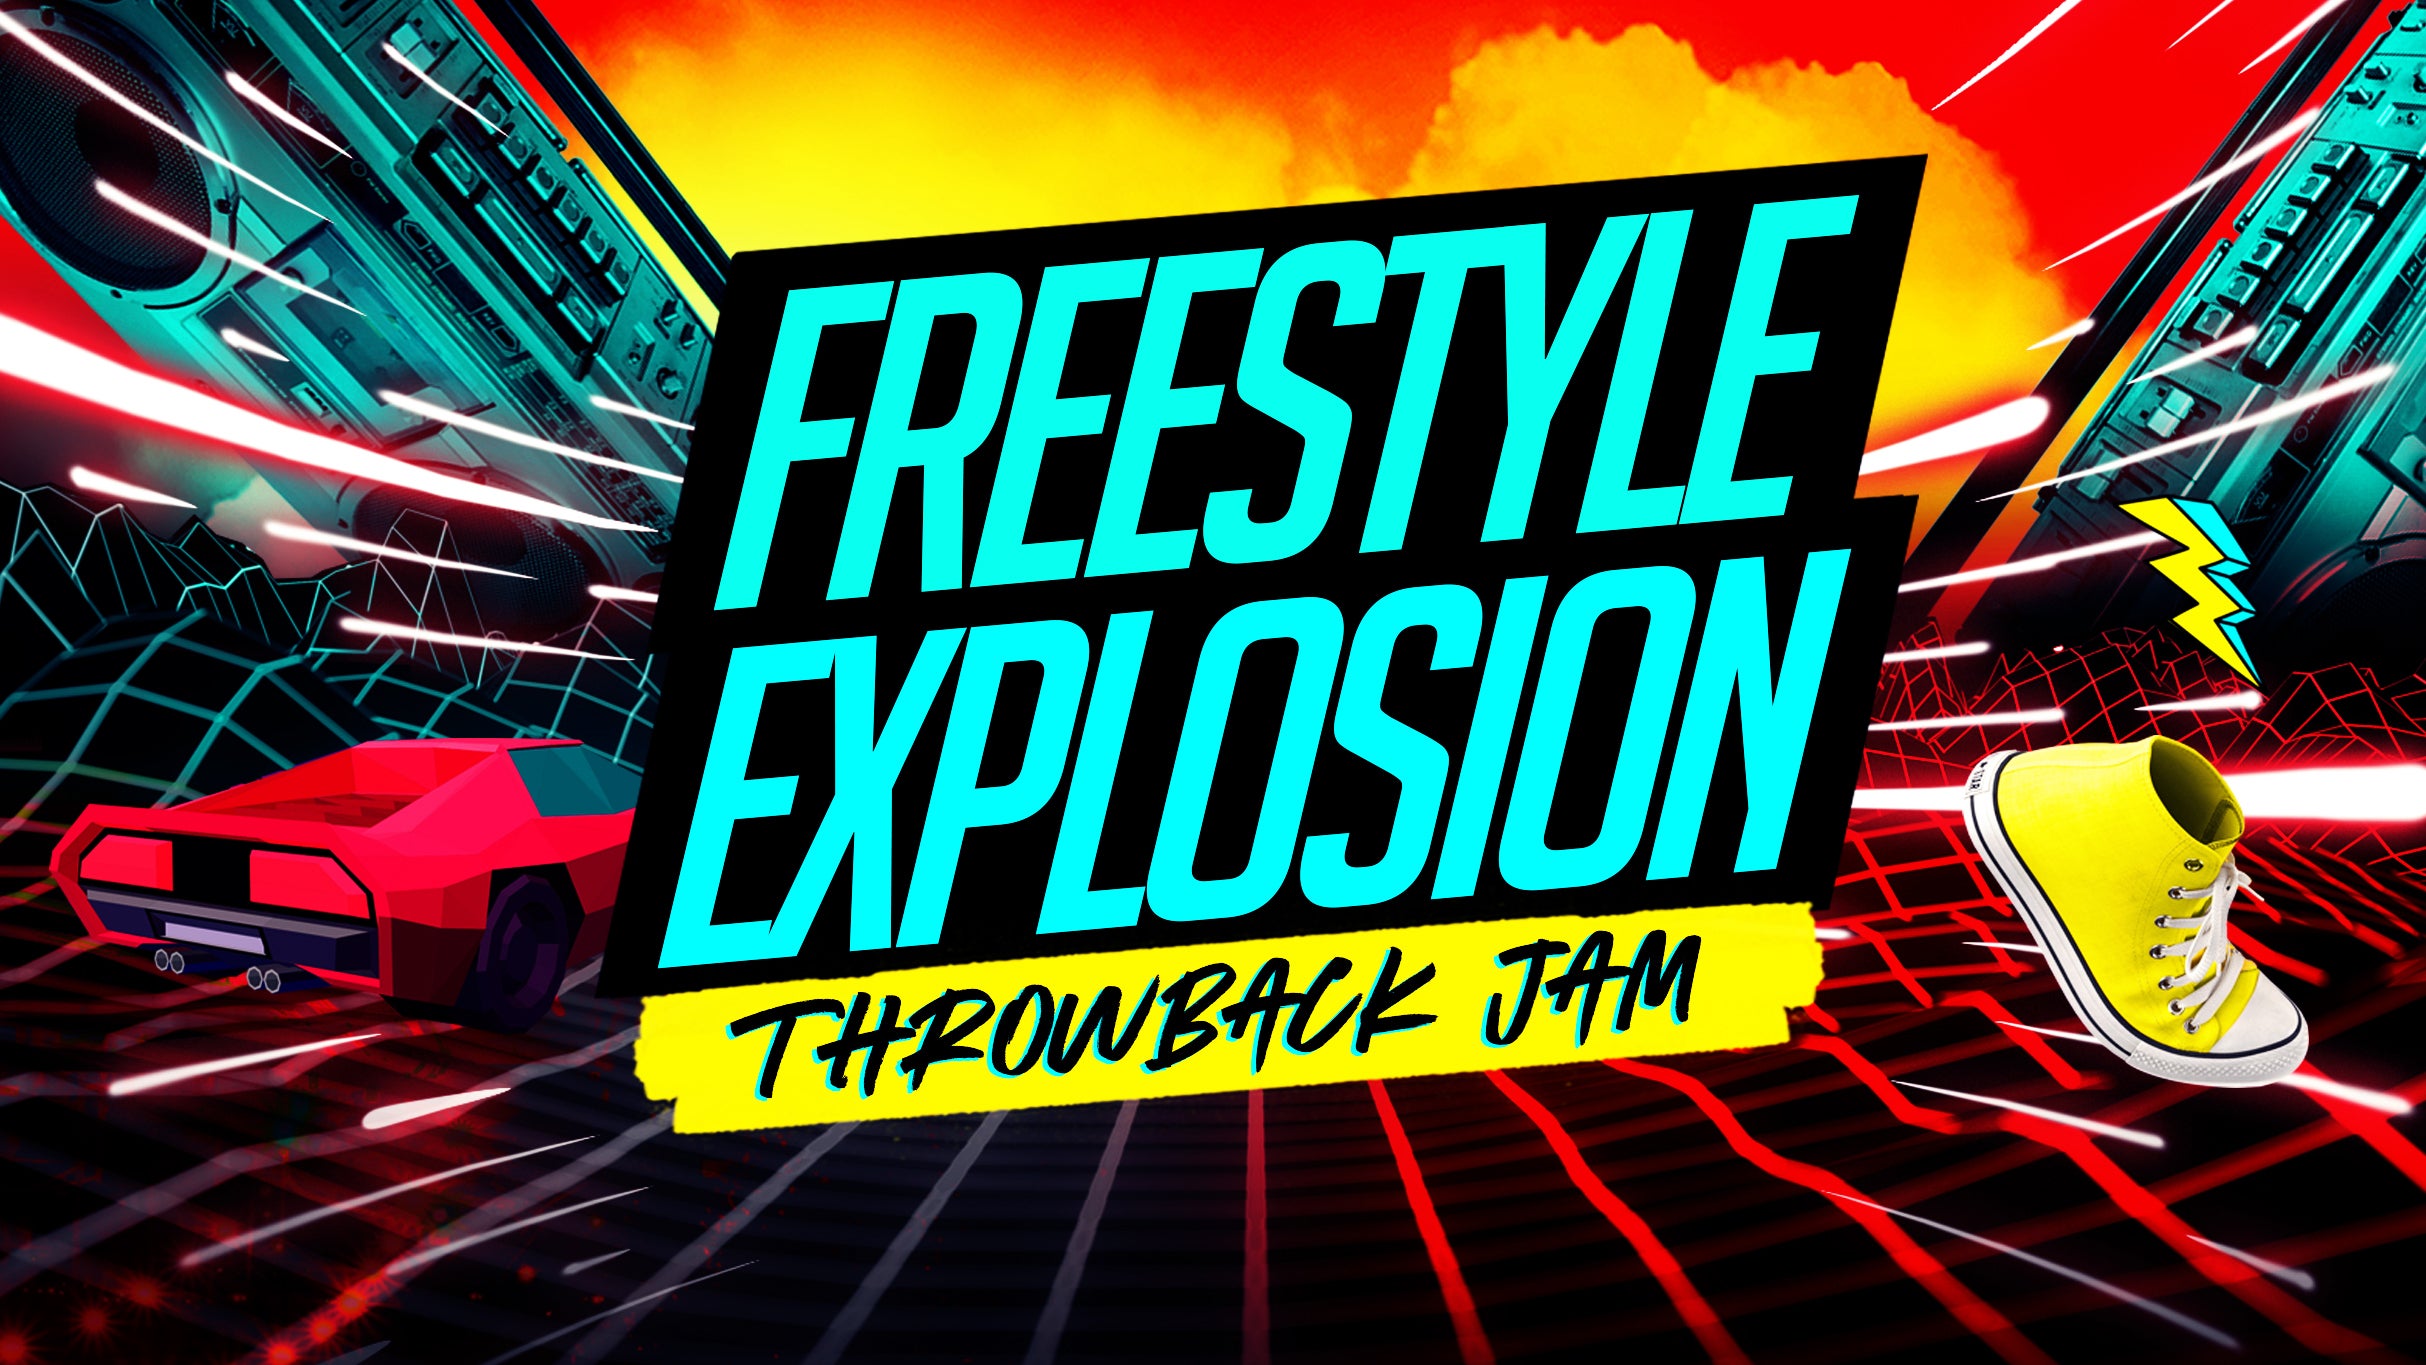 working presale code to Freestyle Explosion Throwback Jam face value tickets in Tampa